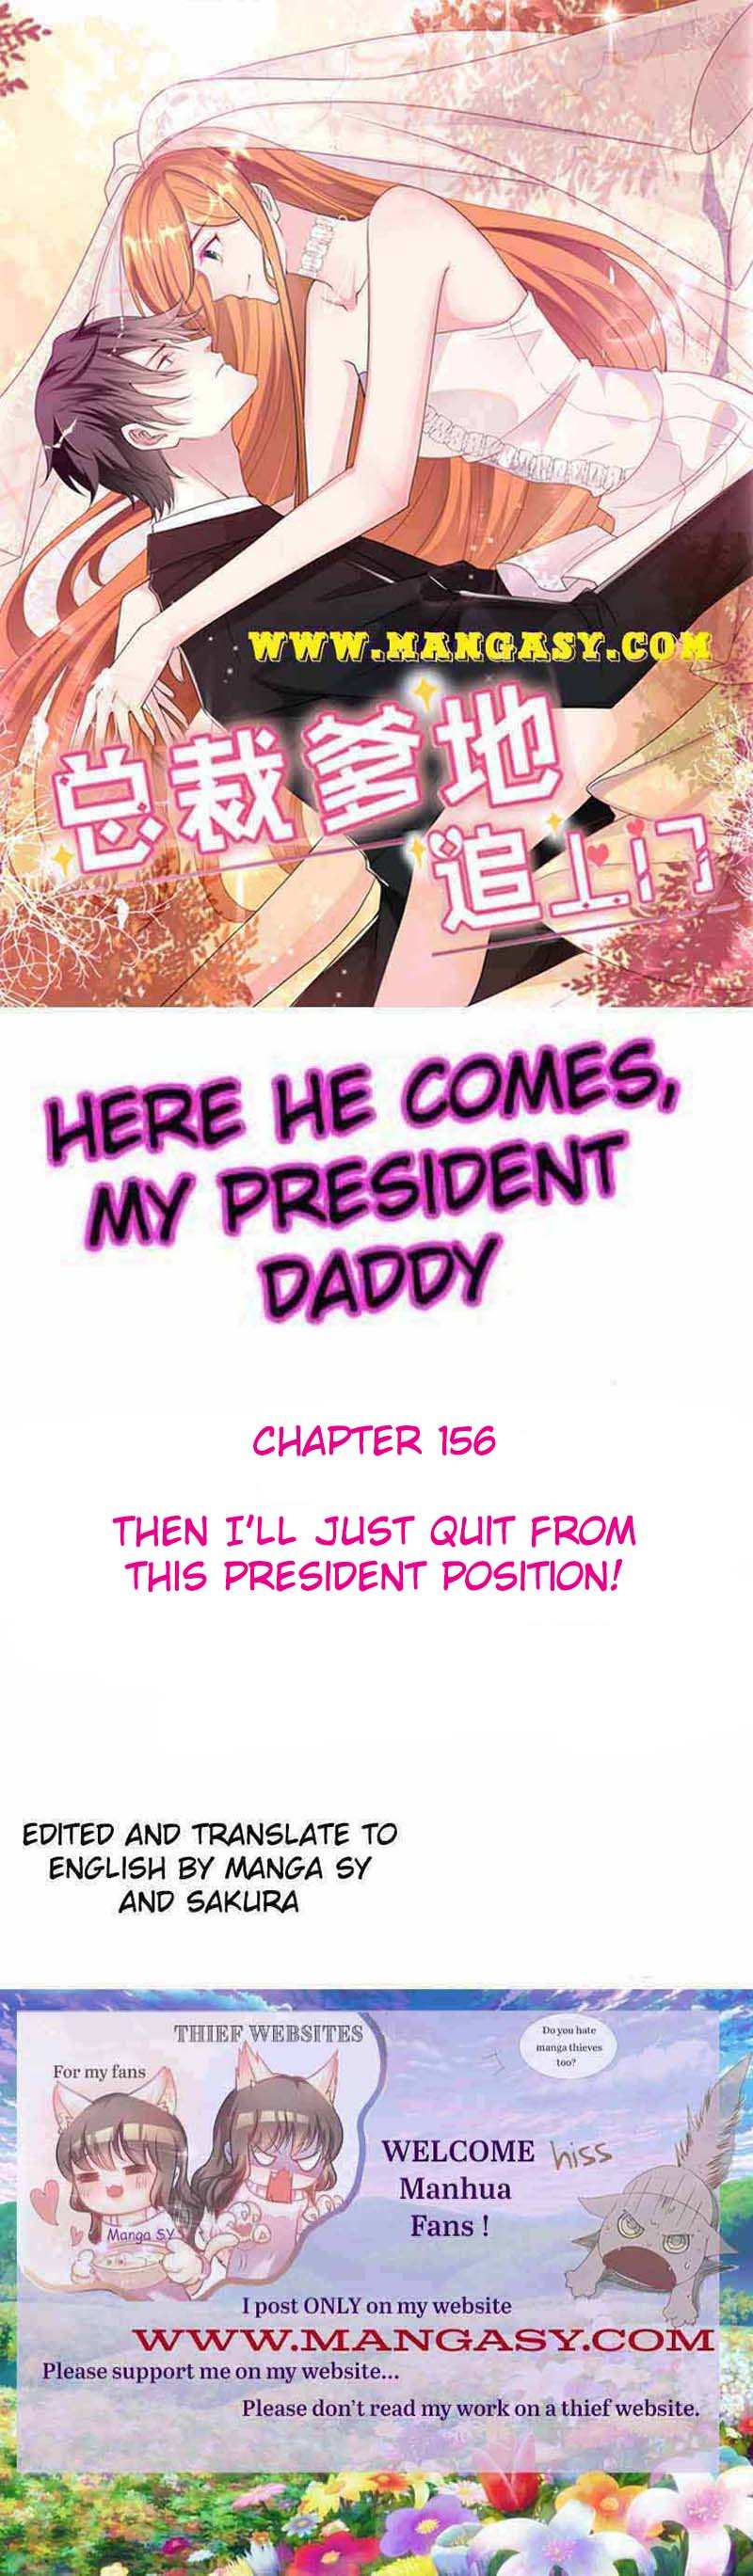 President daddy is chasing you Chapter 156 - page 1